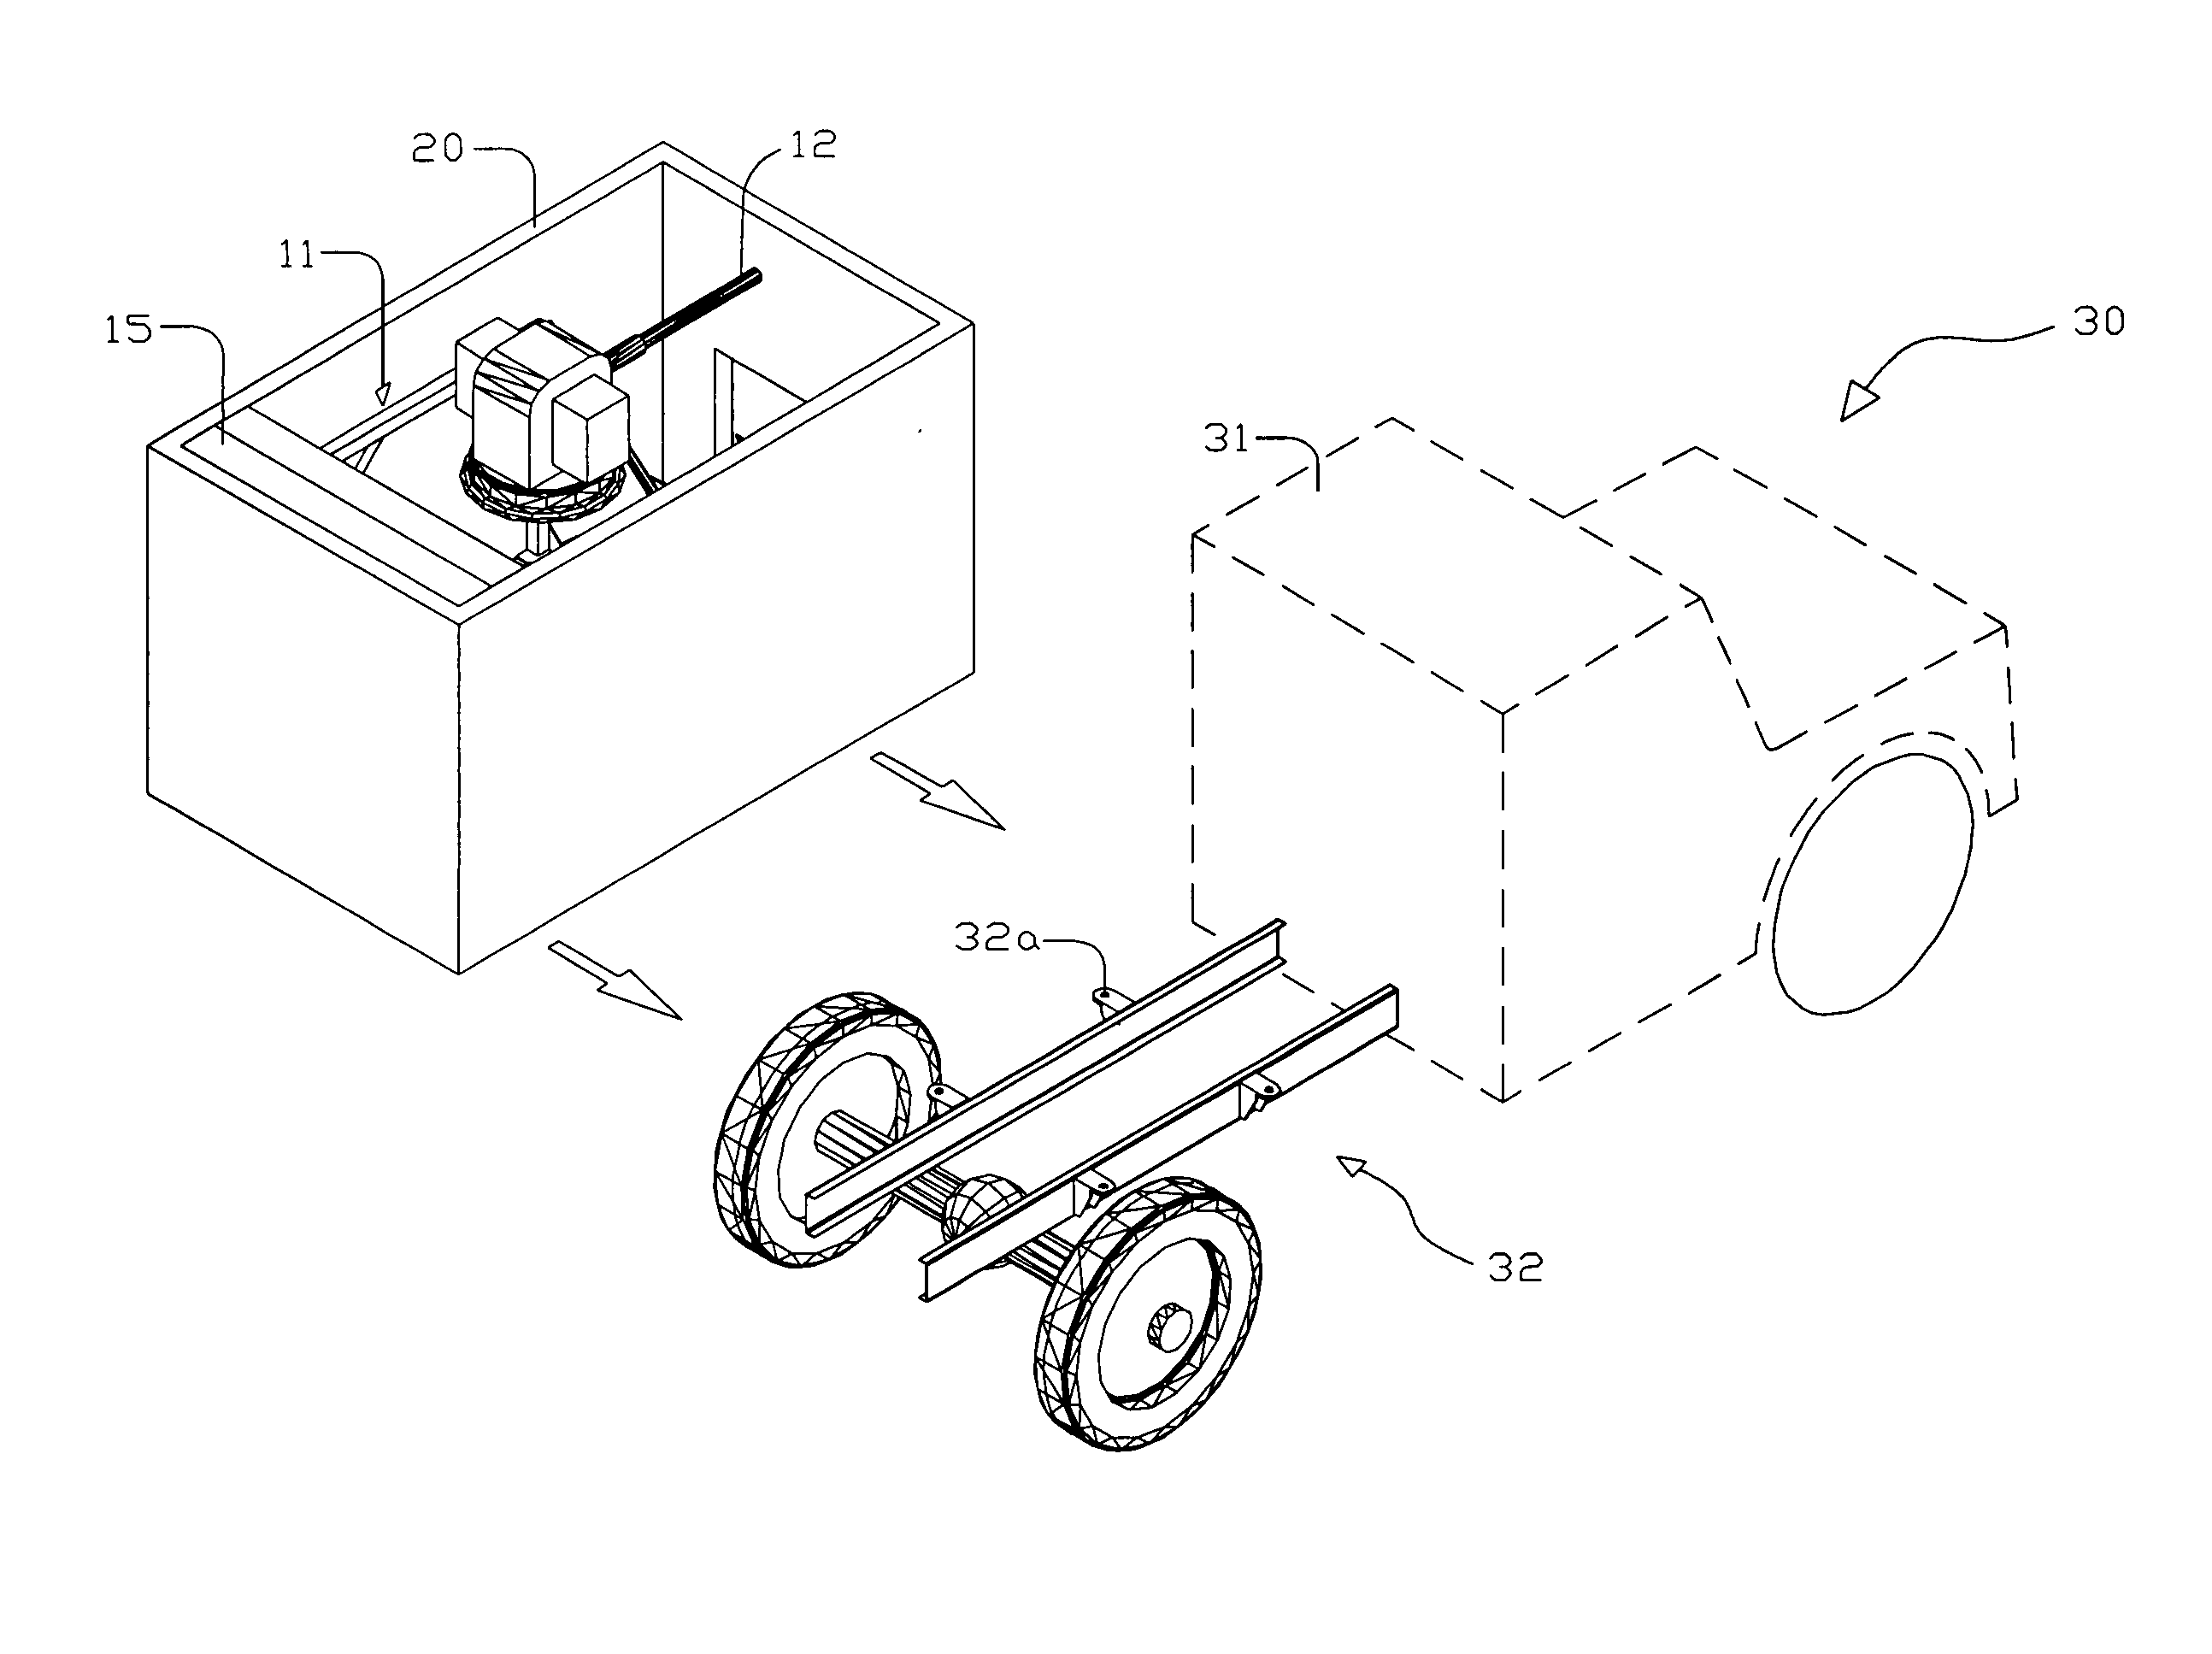 System and method for deploying a weapon from a stealth position